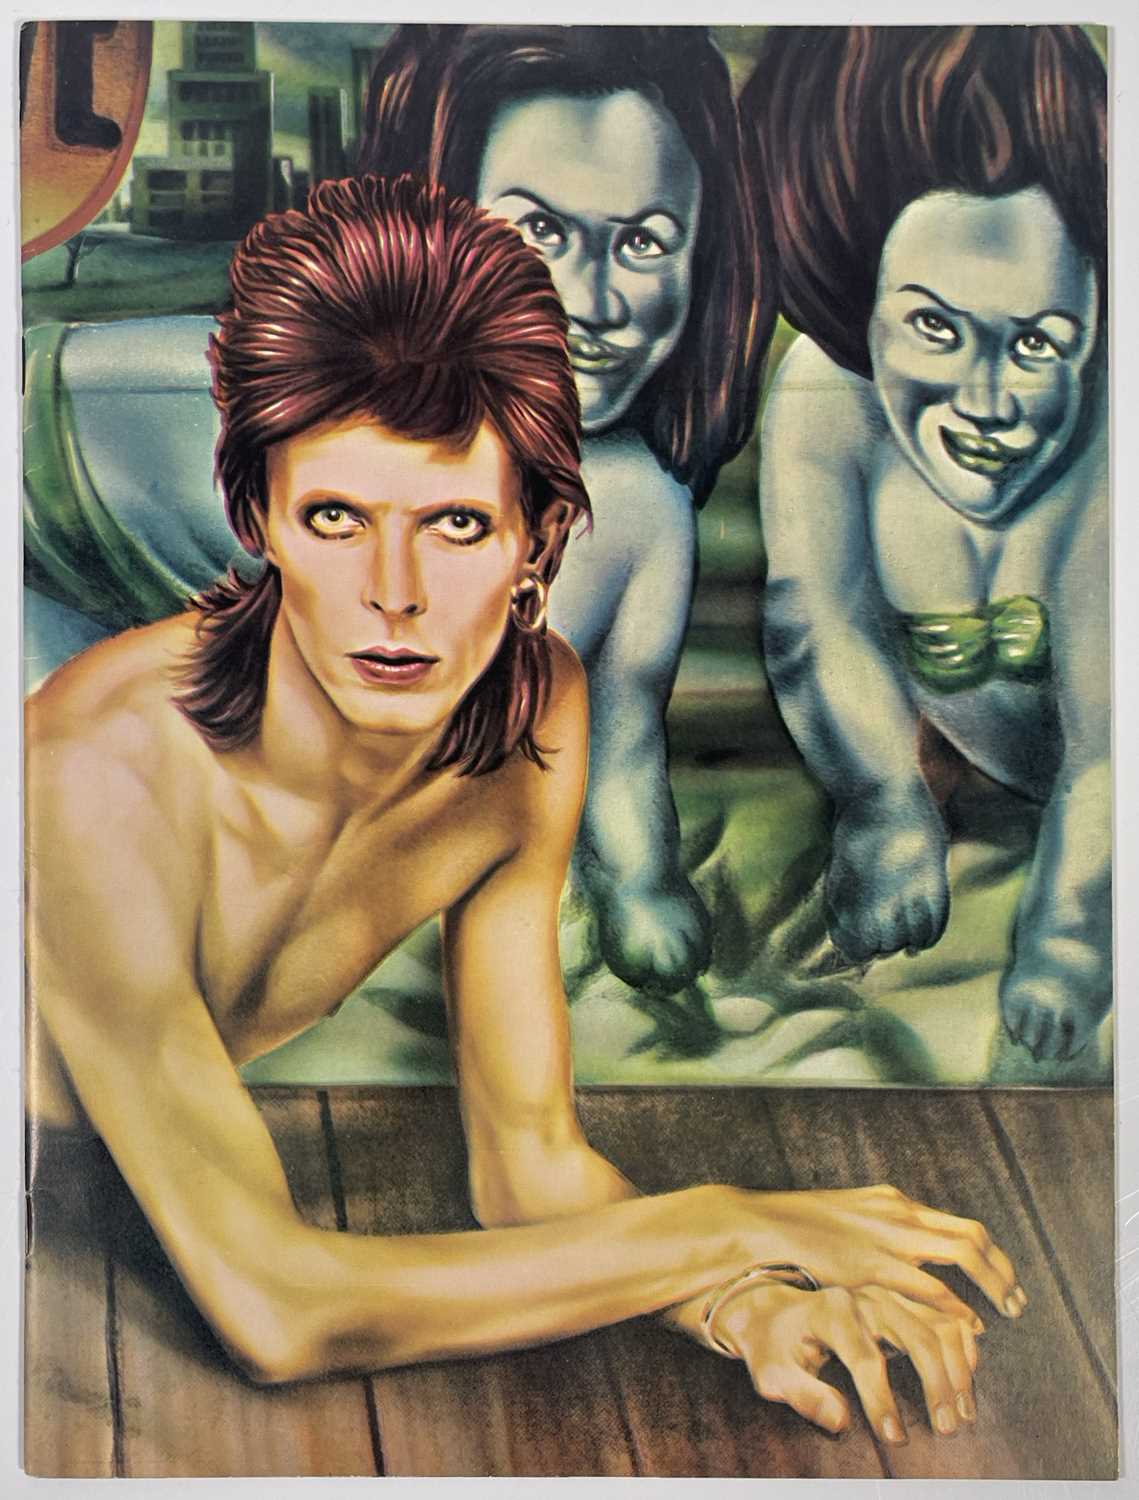 DAVID BOWIE - DIAMOND DOGS US PROGRAMME AND STICKER. - Image 2 of 9